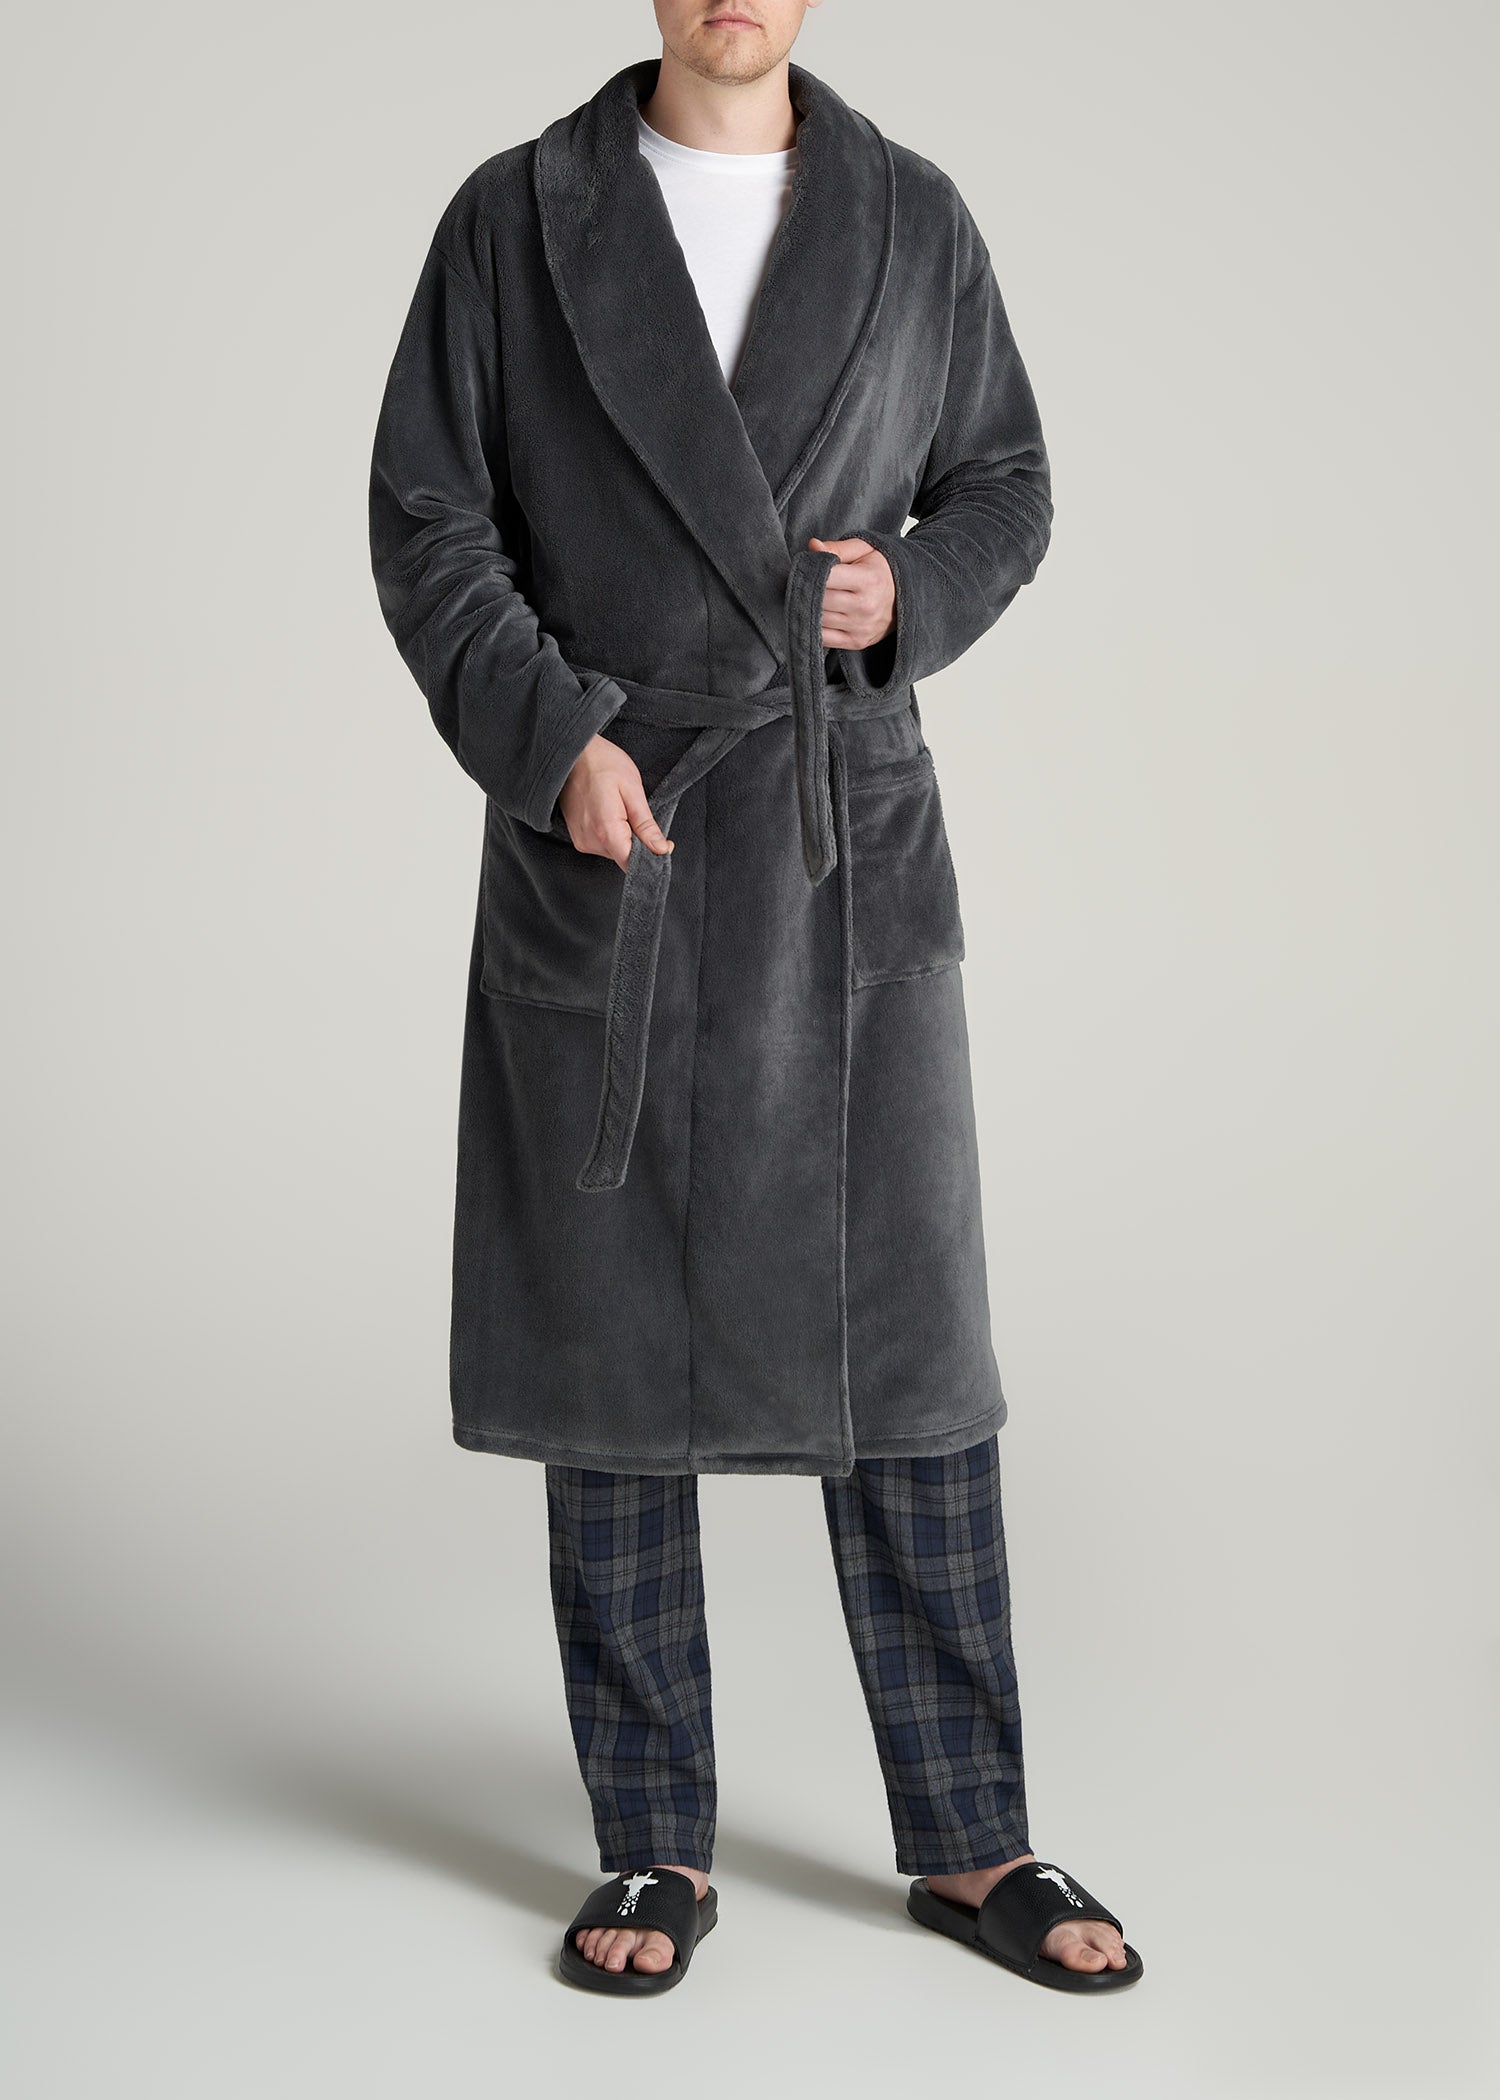 Tall Men's Robe in Charcoal S/M / Tall / Charcoal